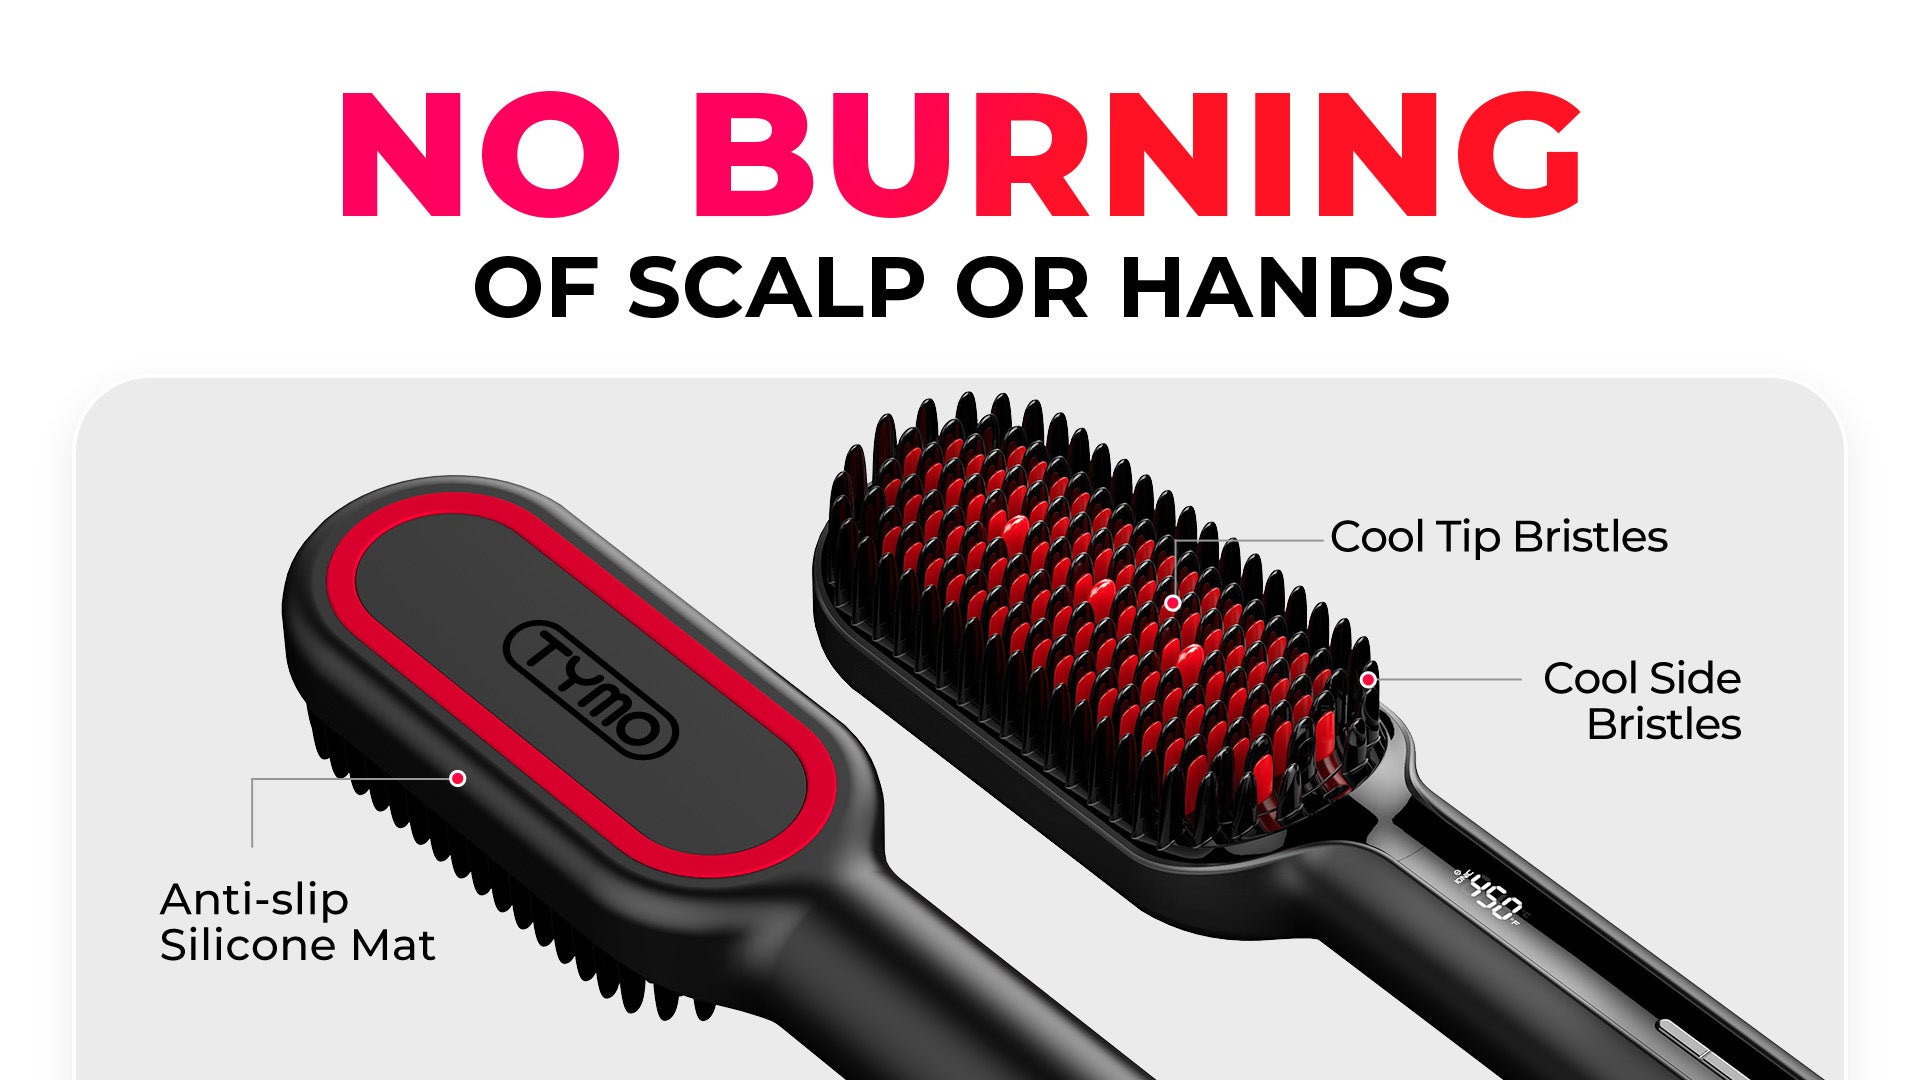 No Burning of Scalp or Hands